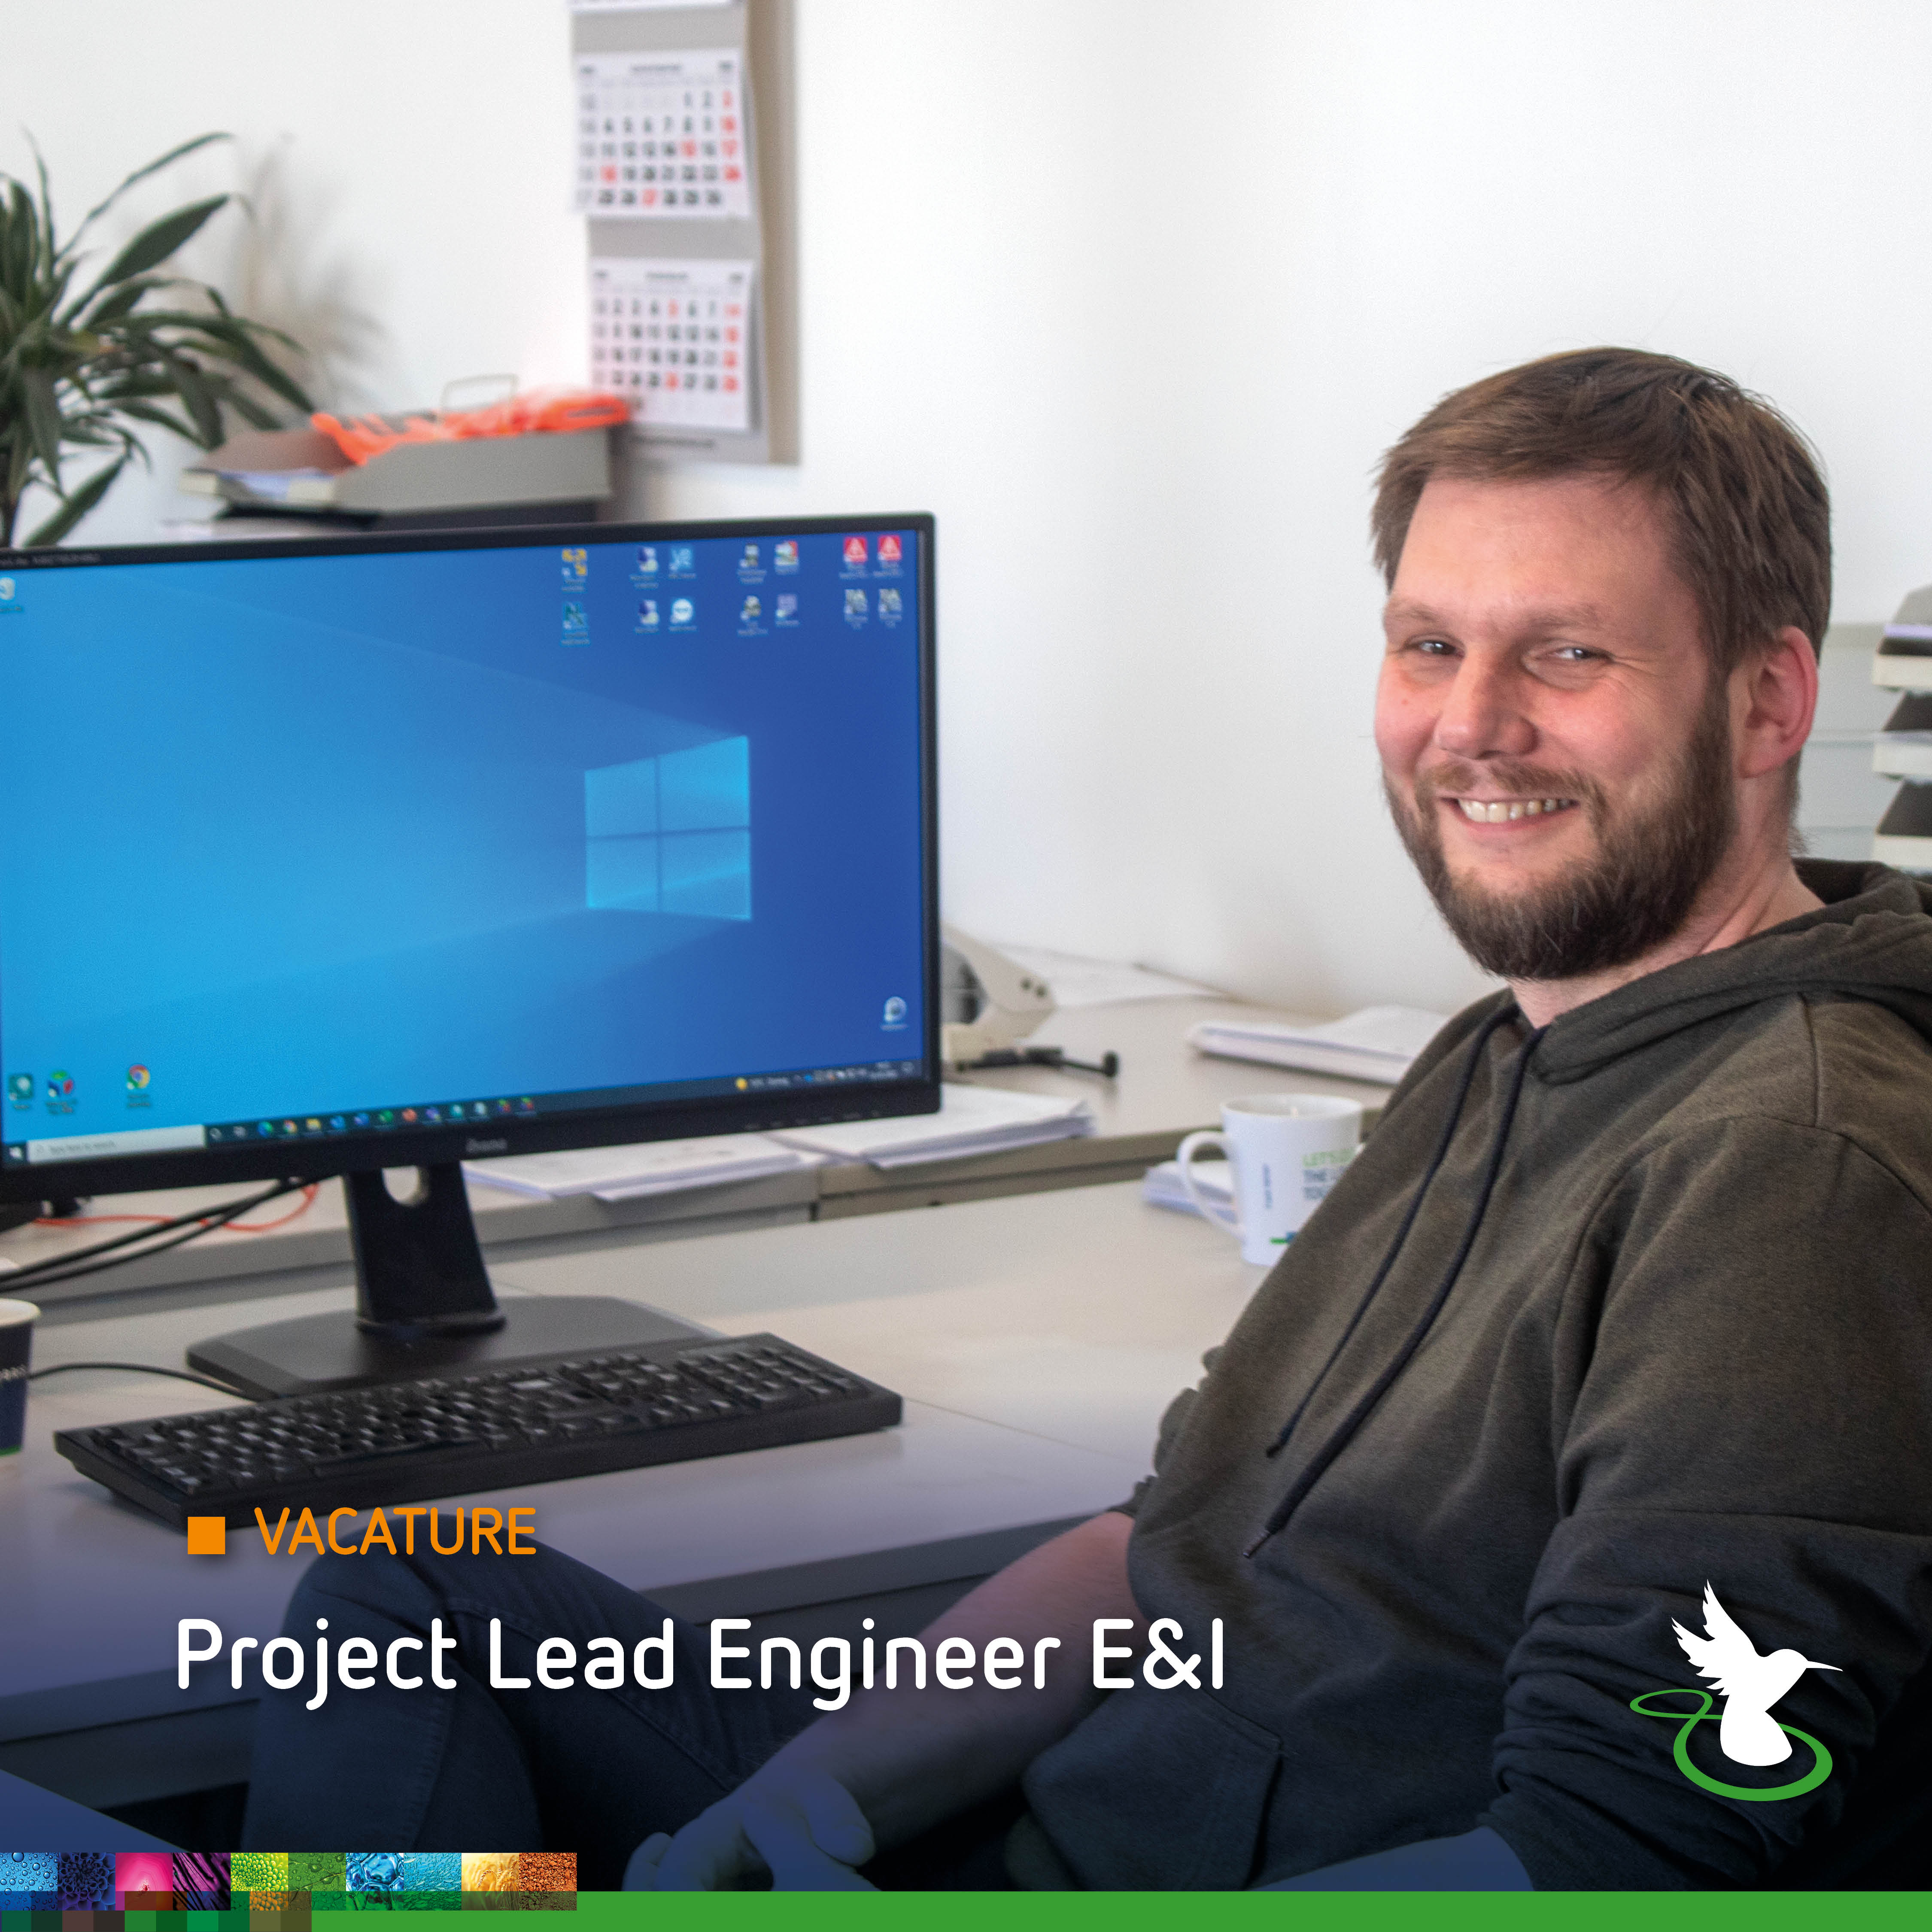 Vacature Project Lead Engineer E&I